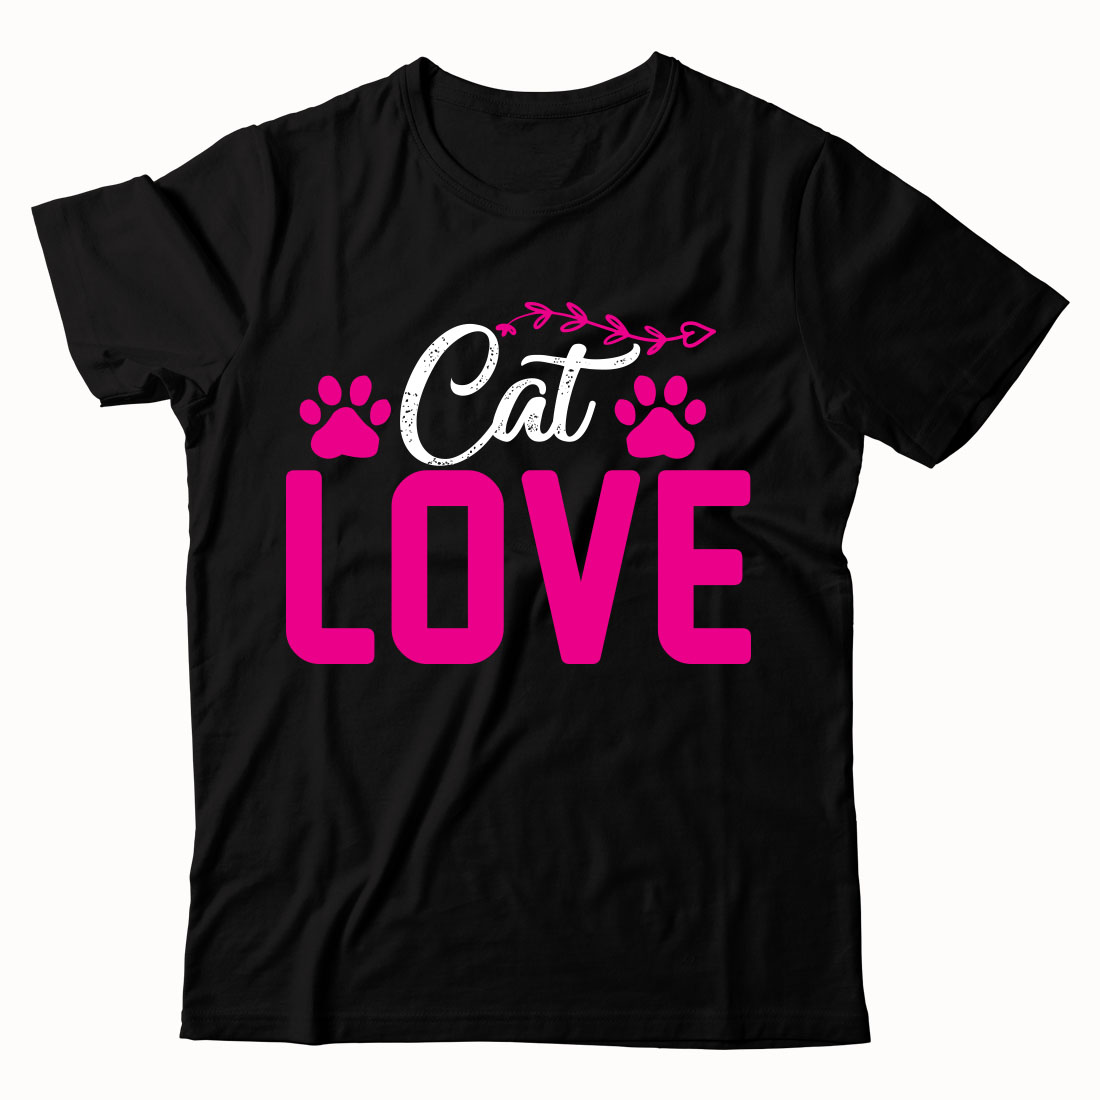 Black t - shirt with pink lettering that says cat love.